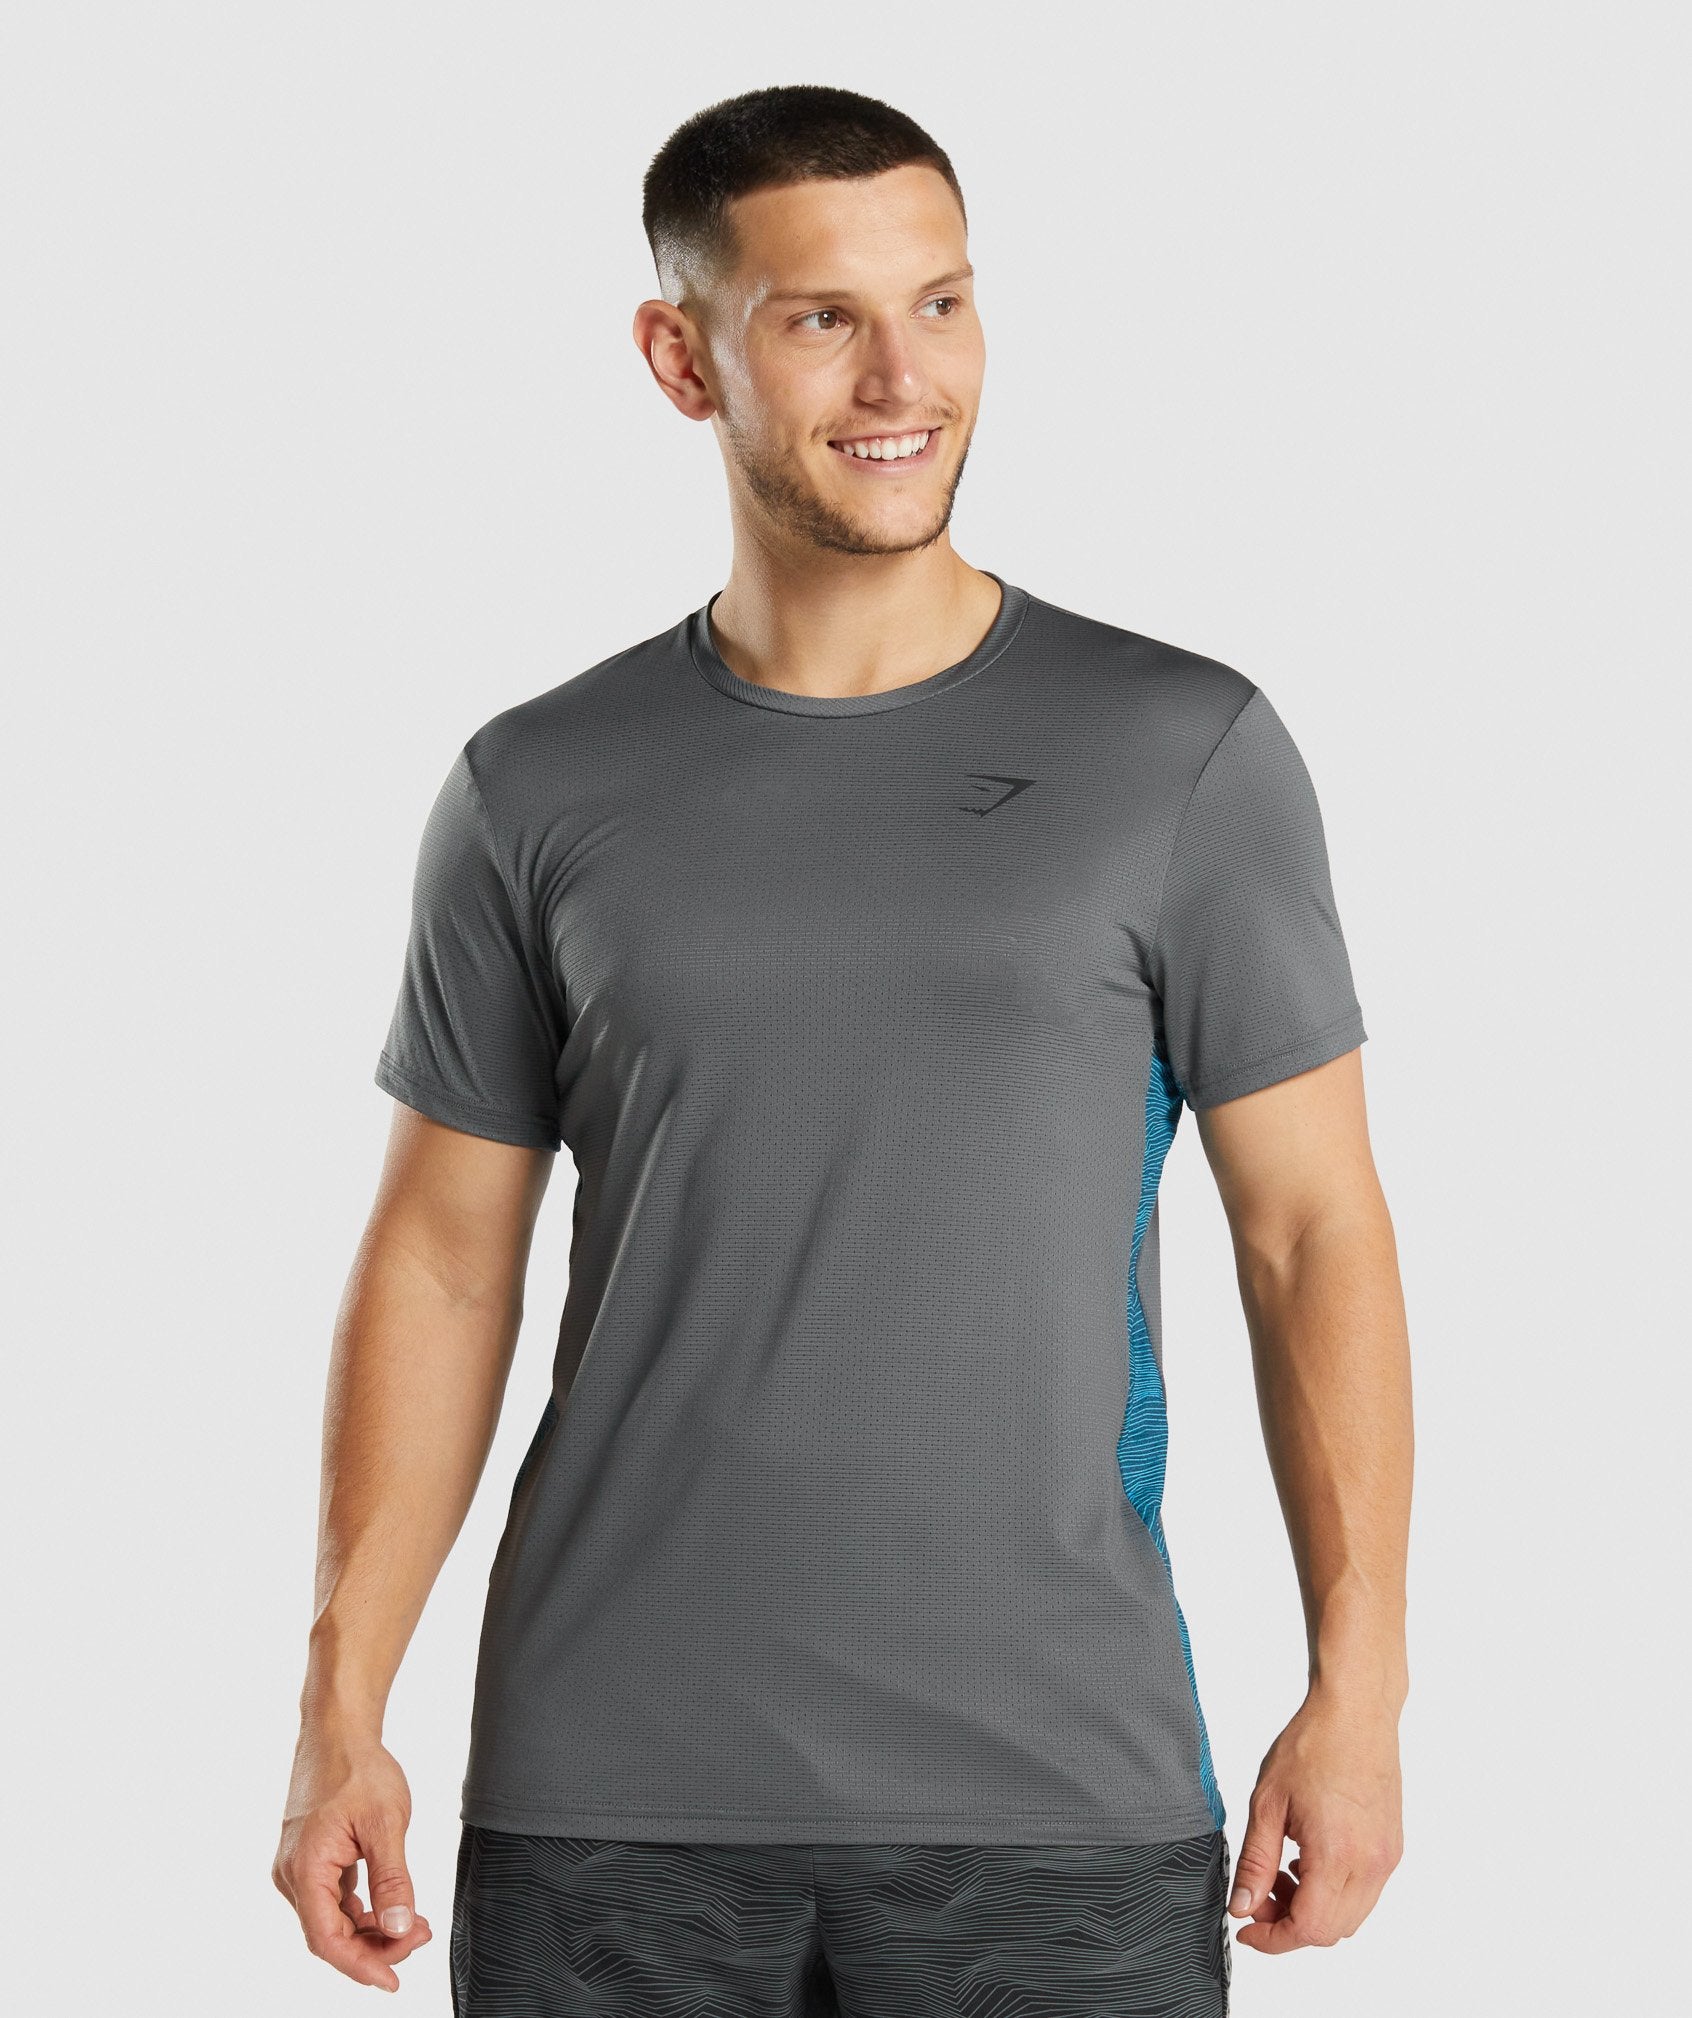 Sport T-Shirt in Charcoal - view 1